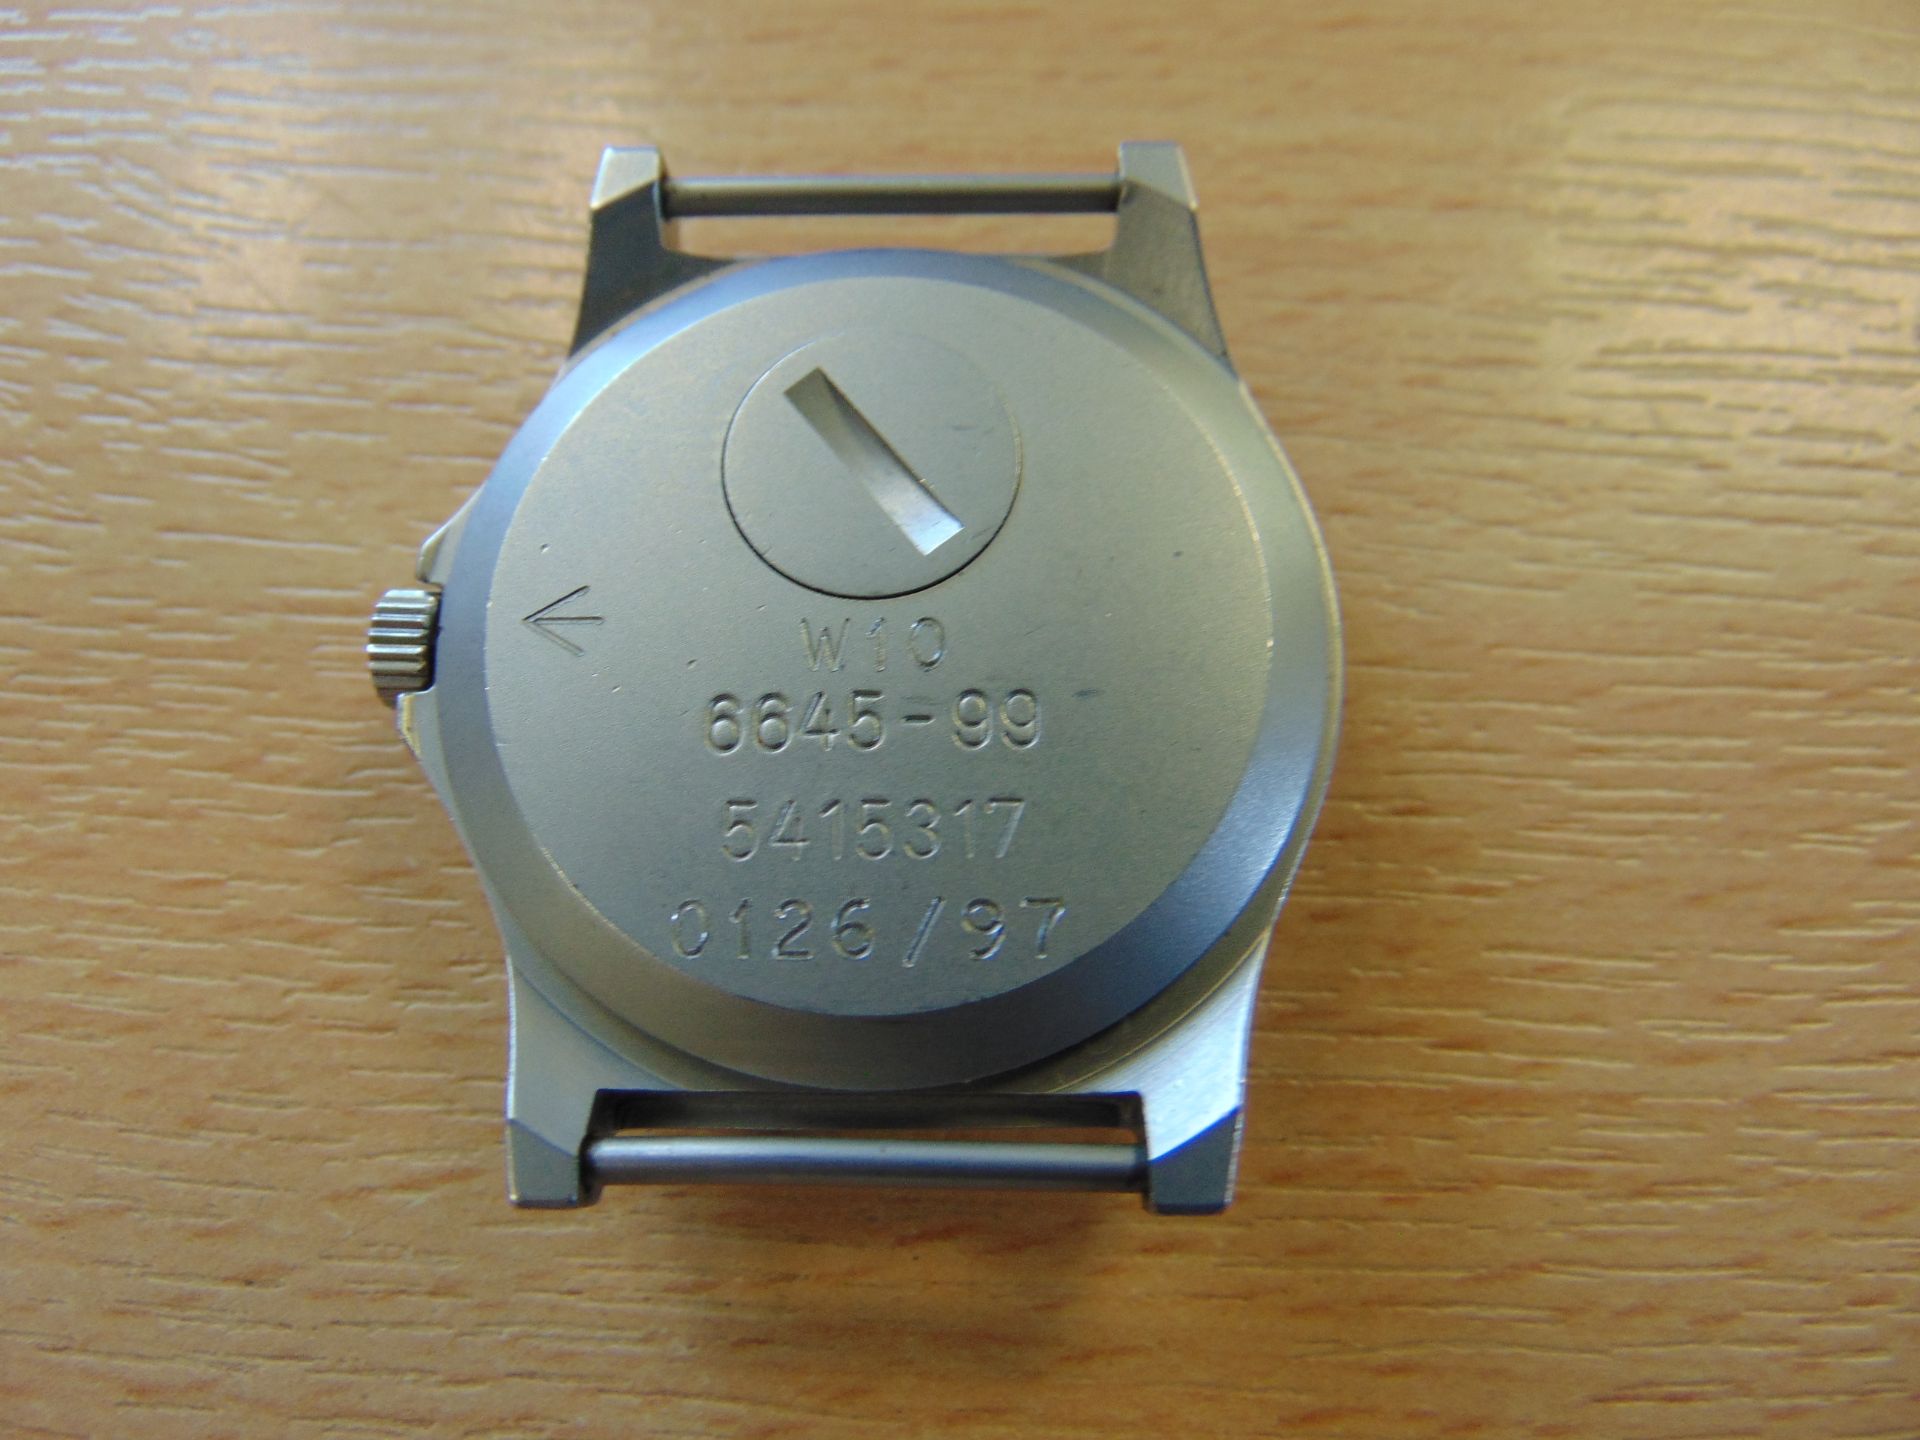 CWC W10 SERVICE WATCH UNISSUED WITH NATO MARKINGS DATED 1997 - Image 4 of 7